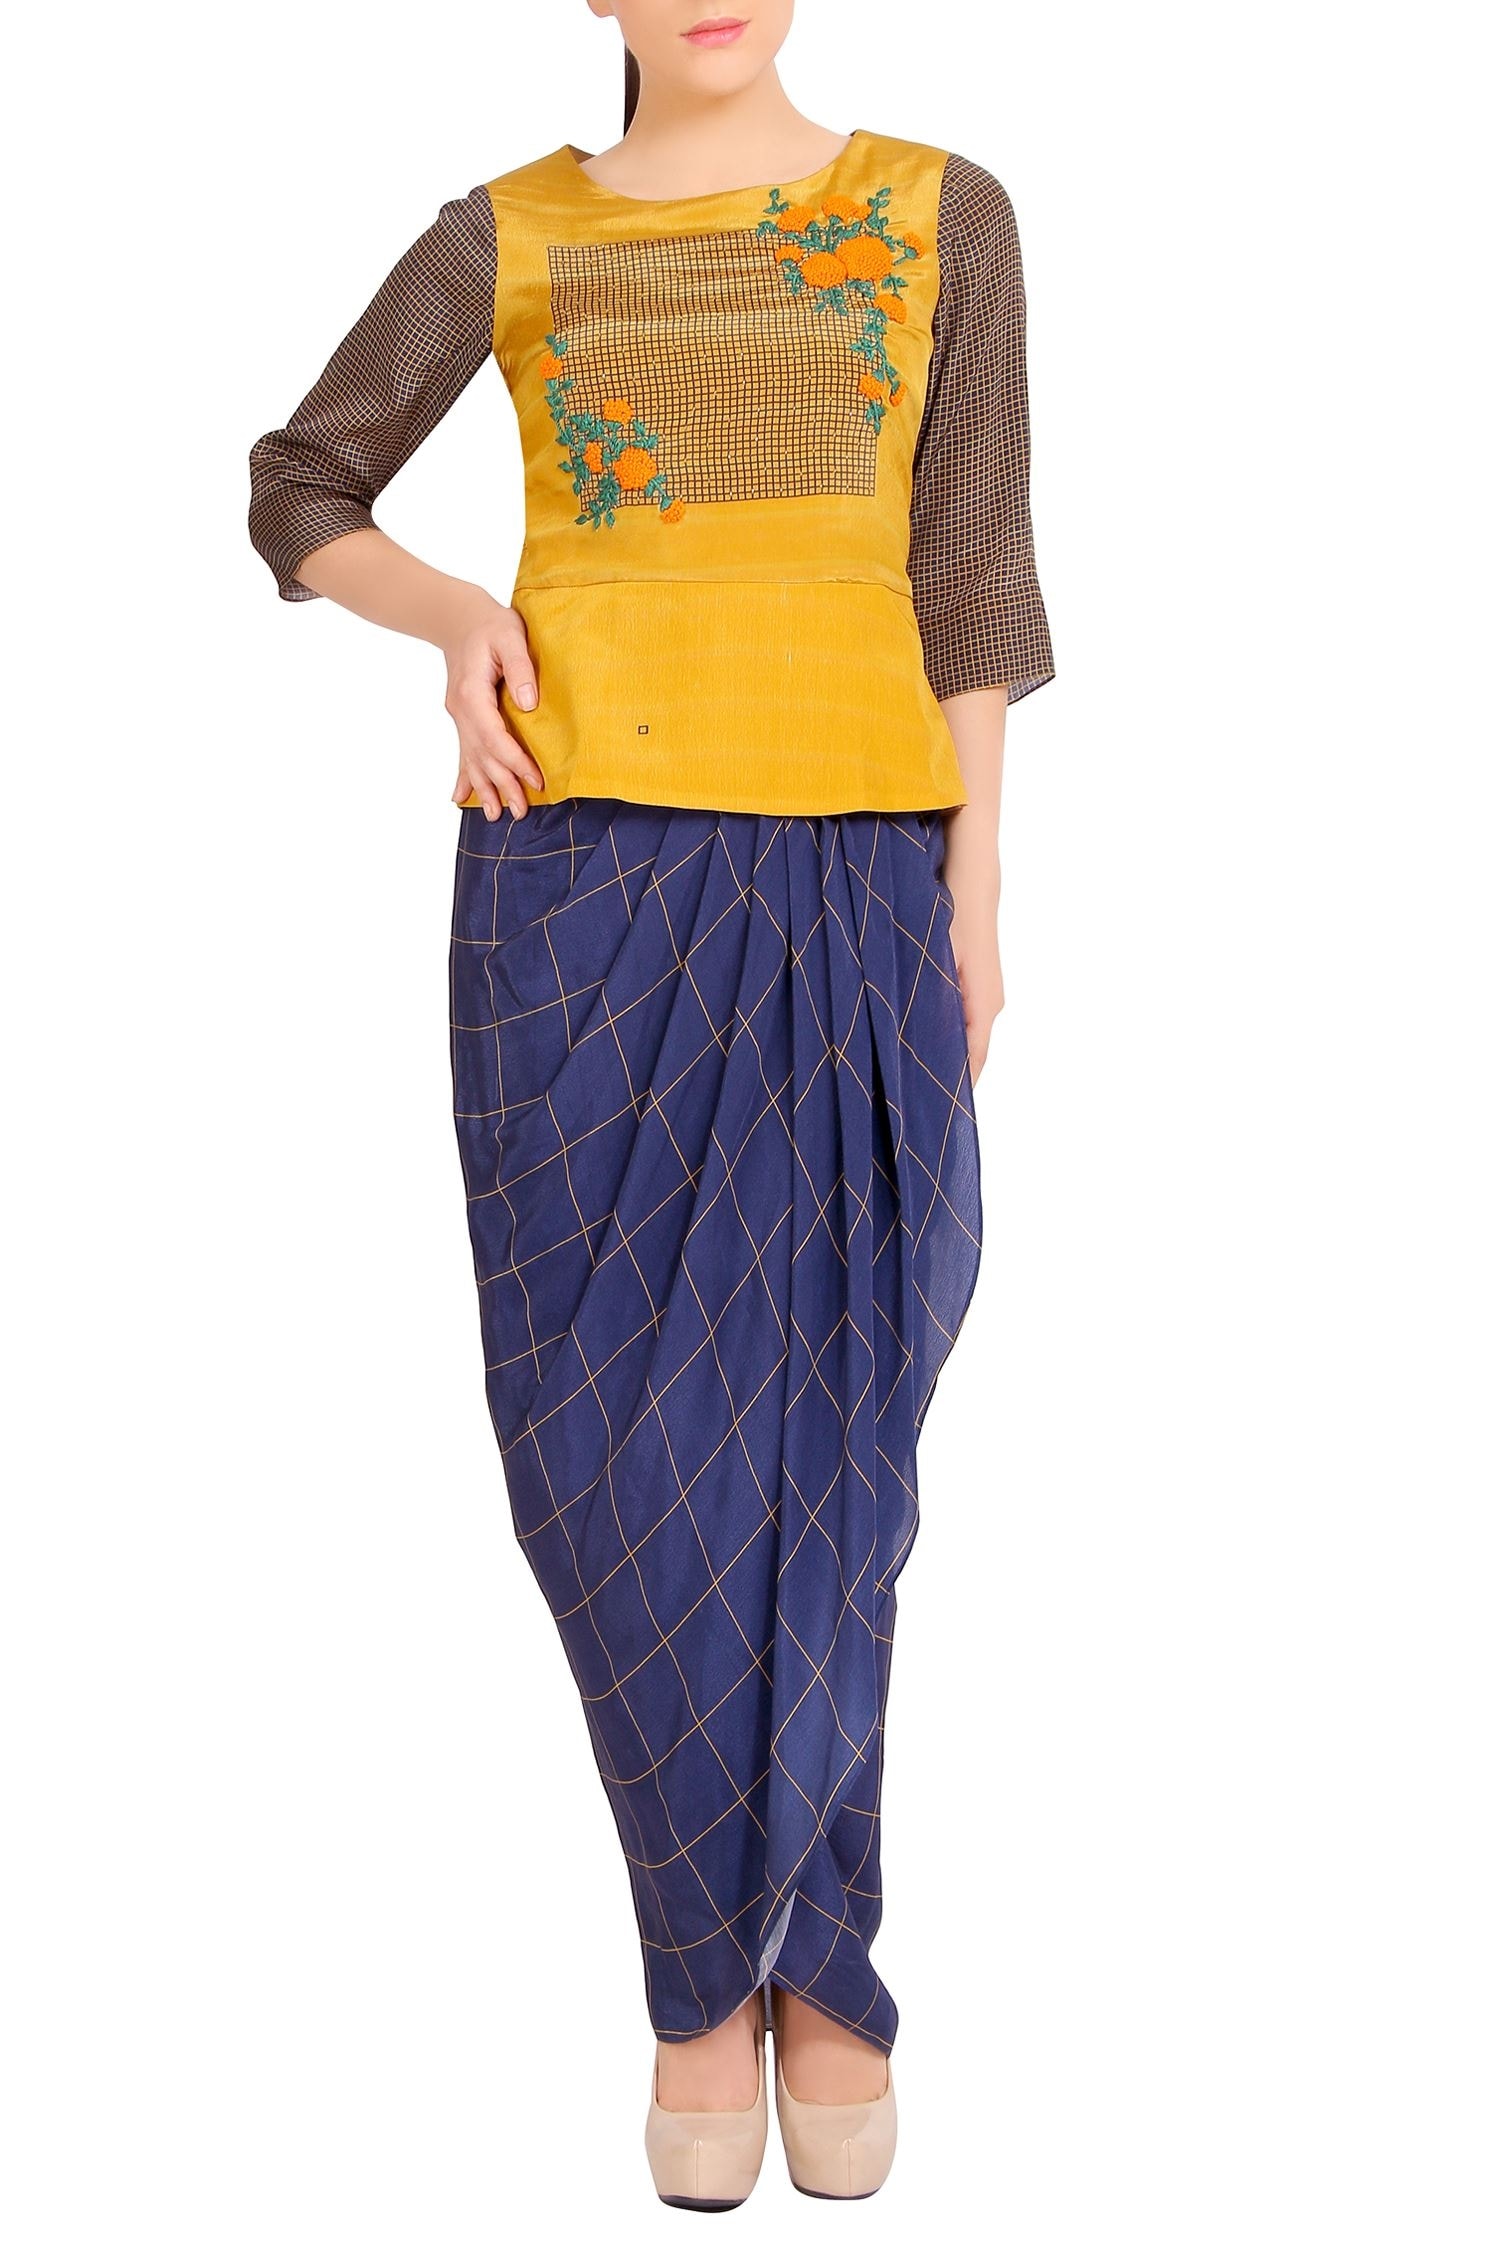 Soup by Sougat Paul Blue Satin Printed Floral Scoop Neck Dhoti Skirt Set For Women